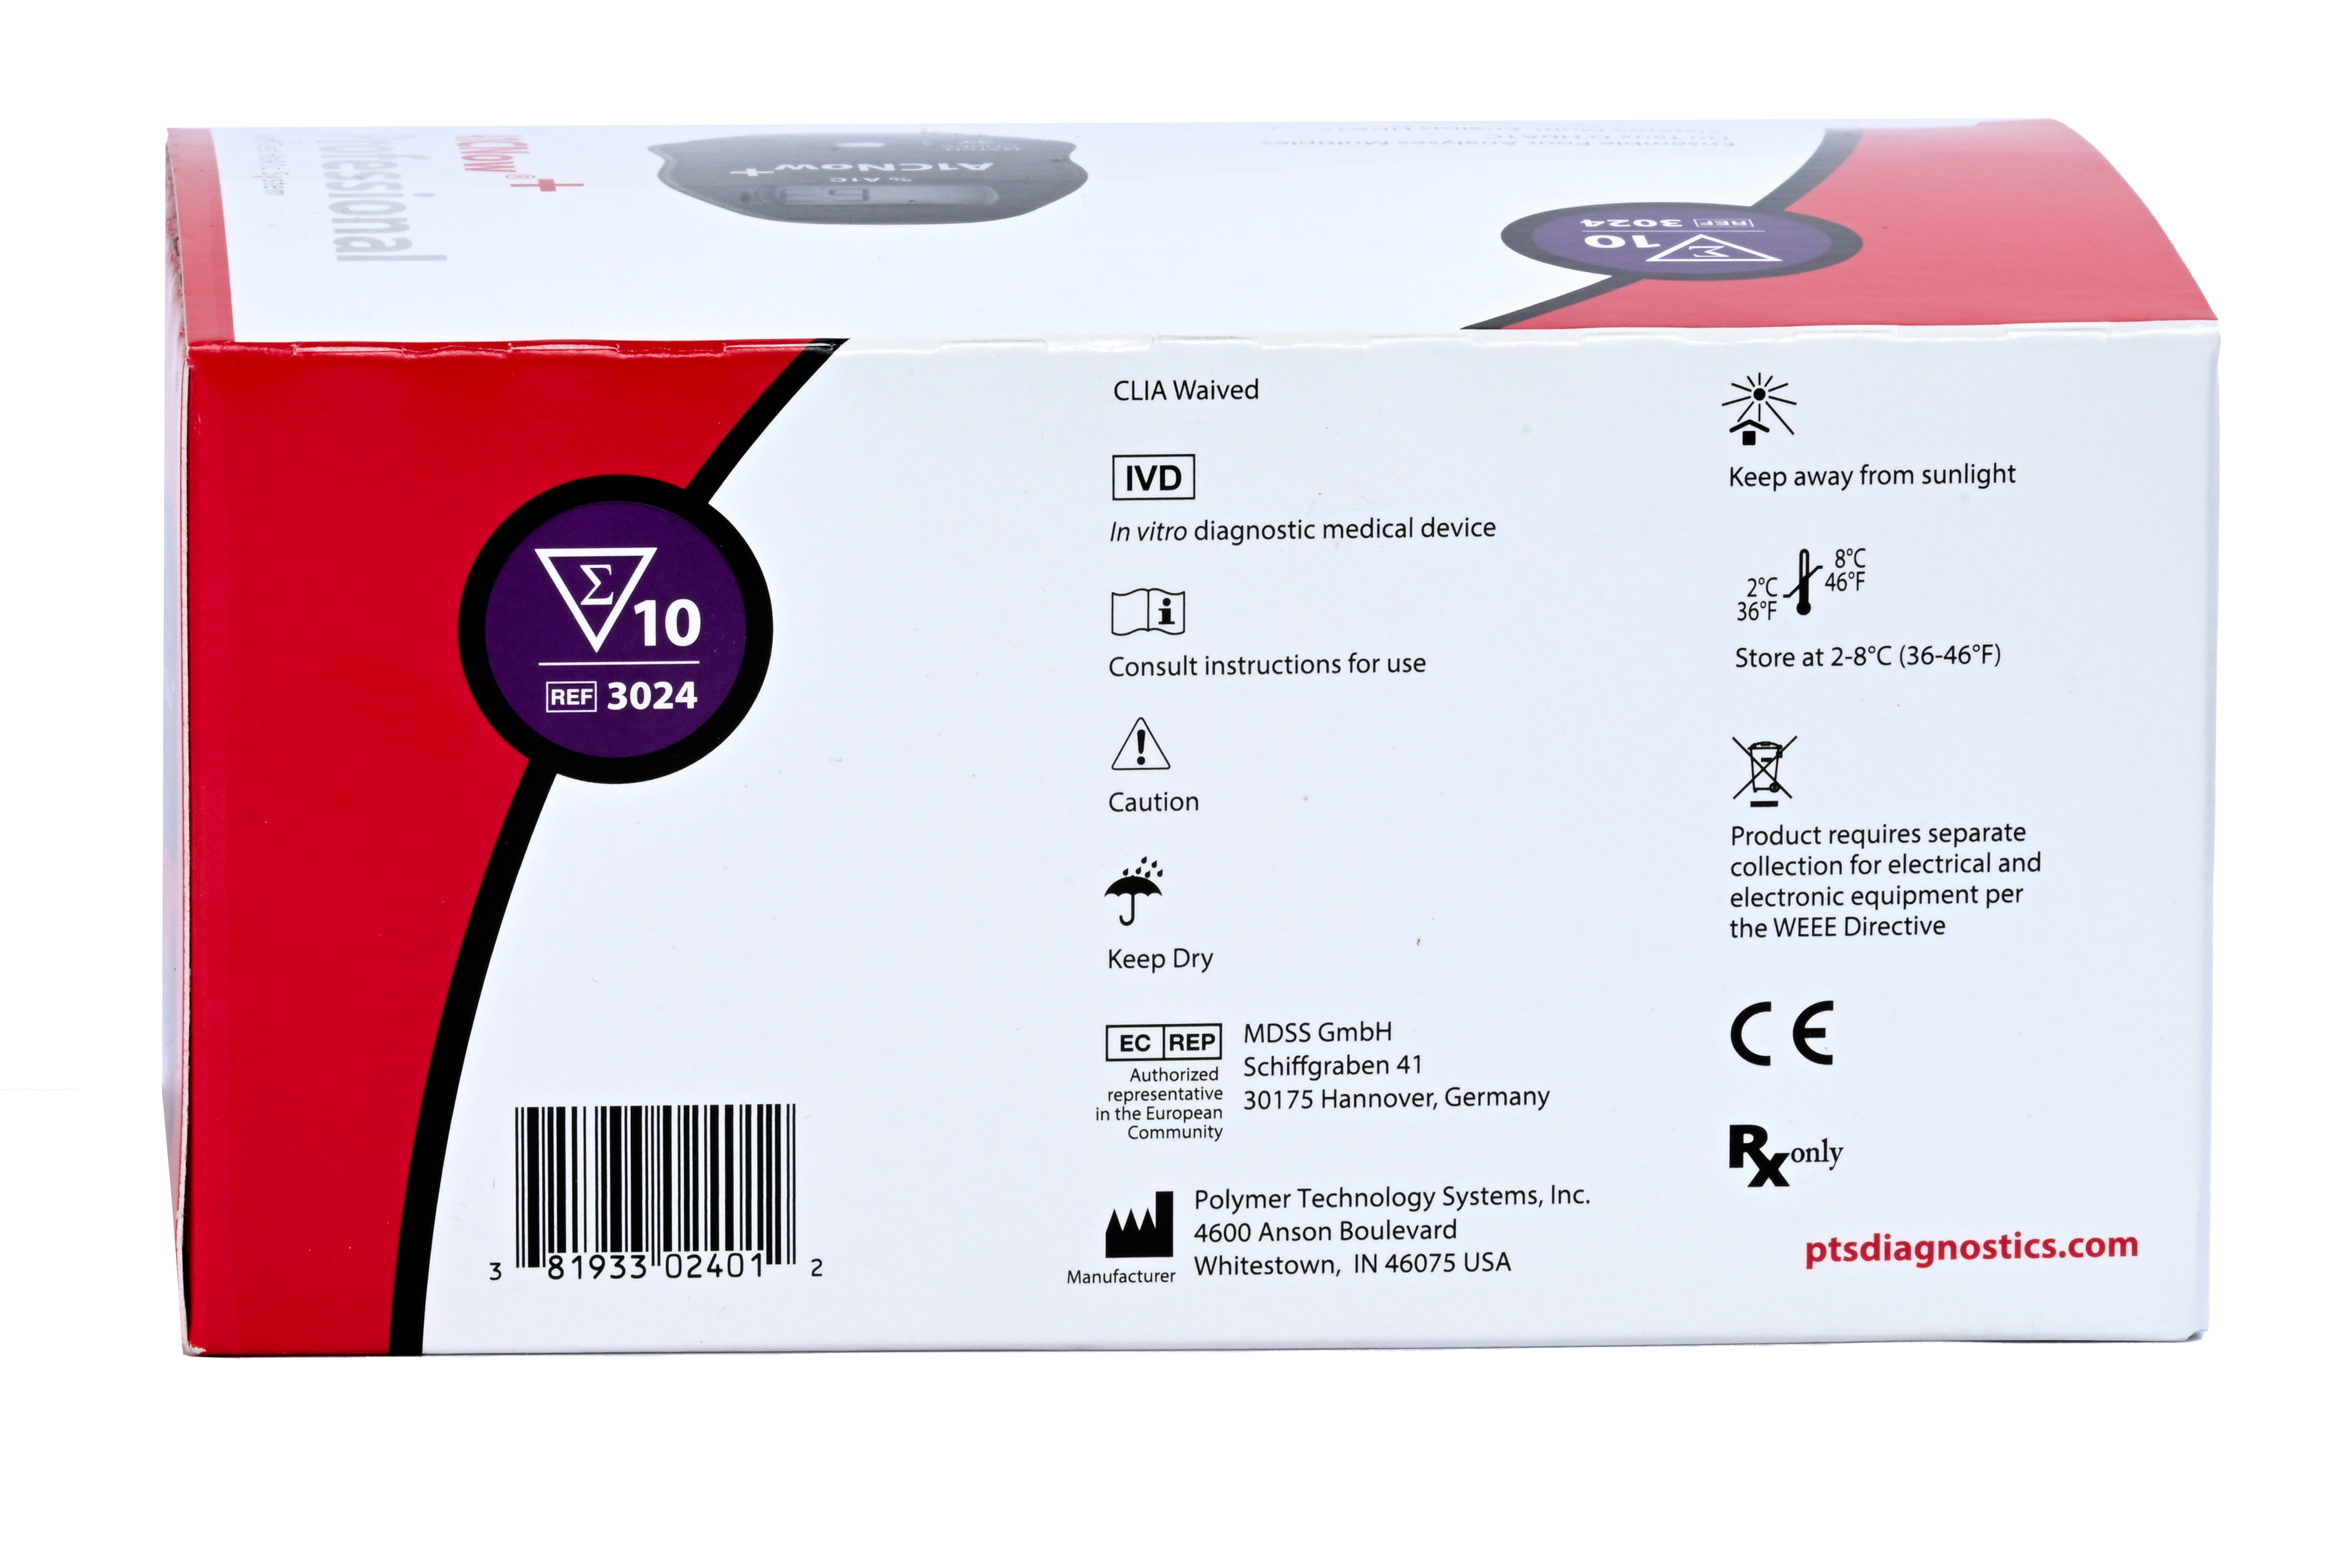 A1CNow Test Kit A1C Diabetes Monitoring Blood Sample 10 Tests - image 4 of 7